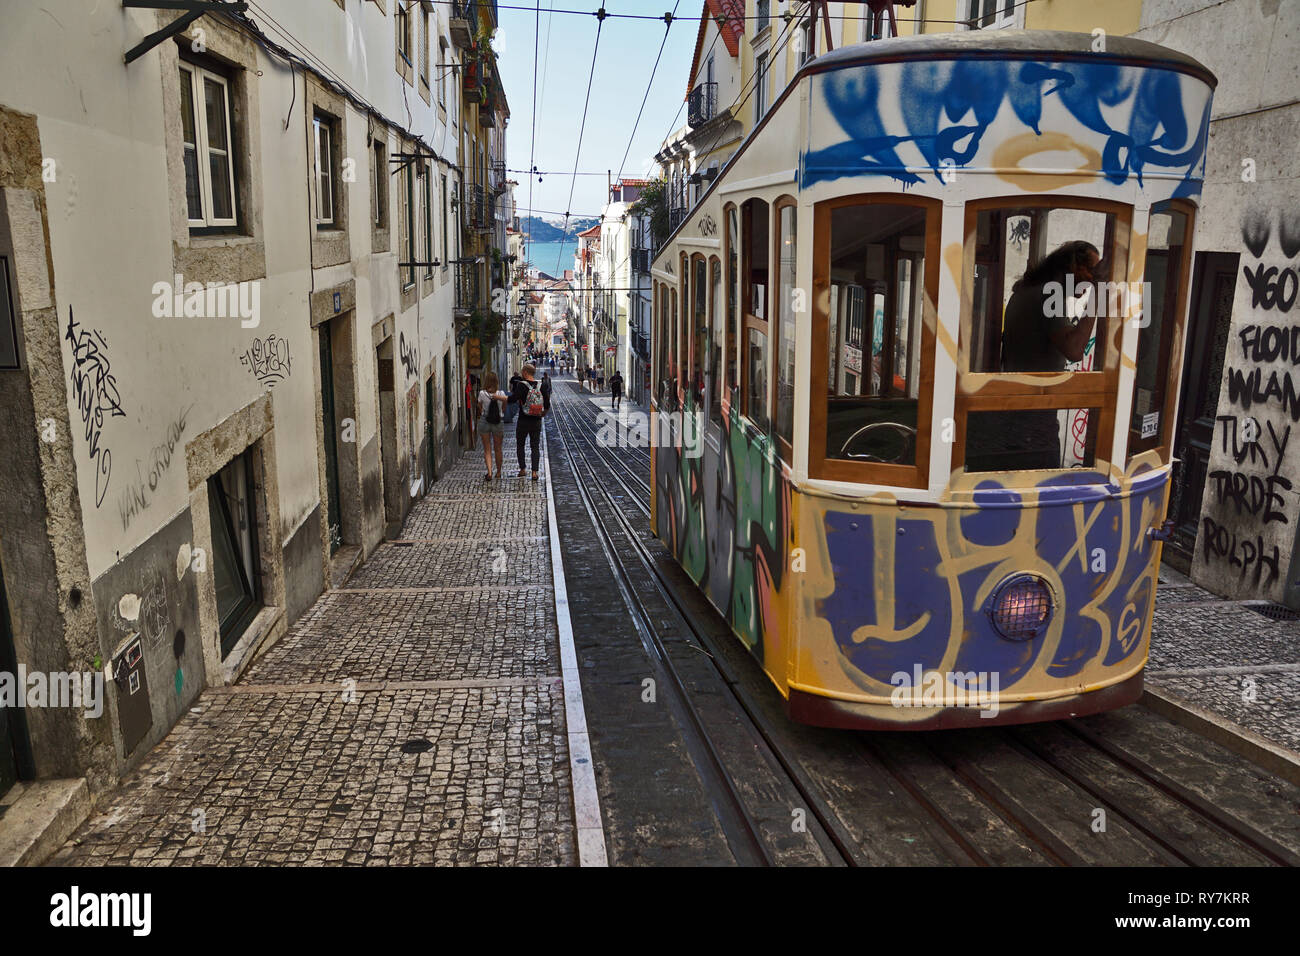 old colorful tram in Lisbon Stock Photo